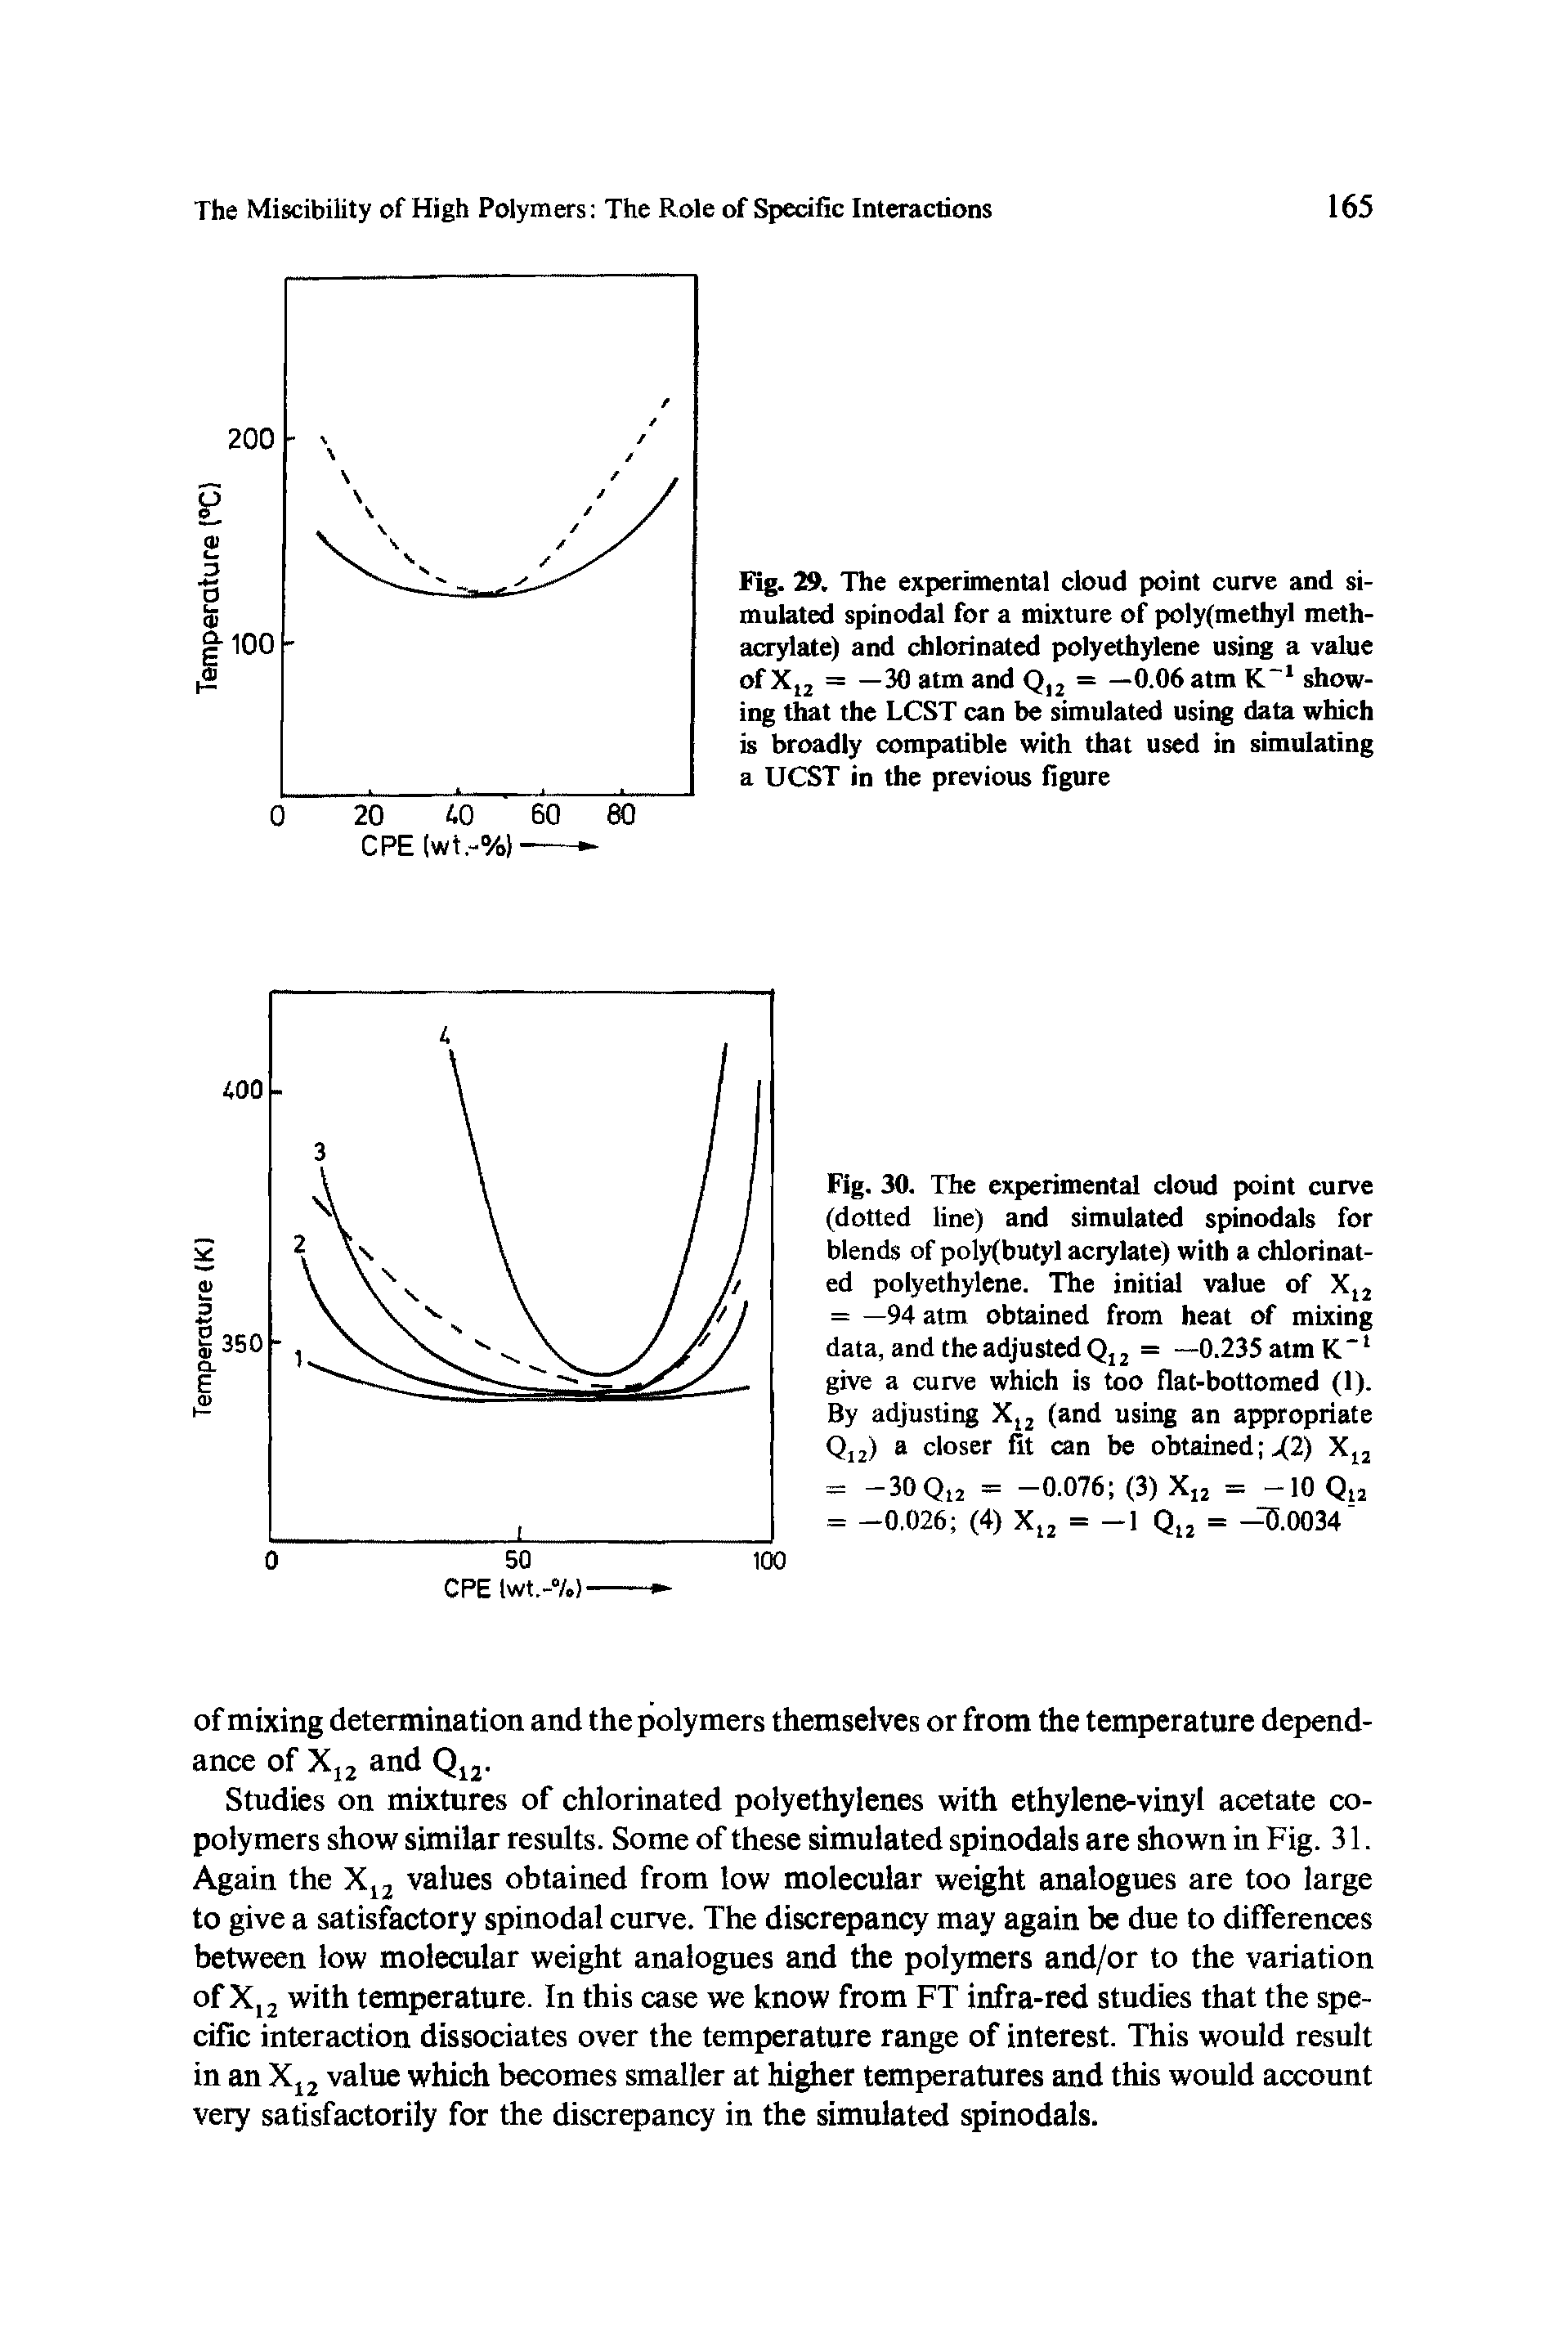 Fig. 30. The experimental cloud point curve (dotted line) and simulated spinodals for blends of poly(butyl acrylate) with a chlorinated polyethylene. The initial value of X,2 = —94 atm obtained from heat of mixing data, and Che adjusted Q,2 = —0.235 atm K" give a curve which is too flat-bottomed (1). By adjusting X j using an appropriate Qjj) a closer fit can be obtained X2) Xj2 = -30Qi2 = -0.076 (3) Xjj = -10 Qjj = -0.026 (4) Xi2 = -1 Qij =. 0034 ...